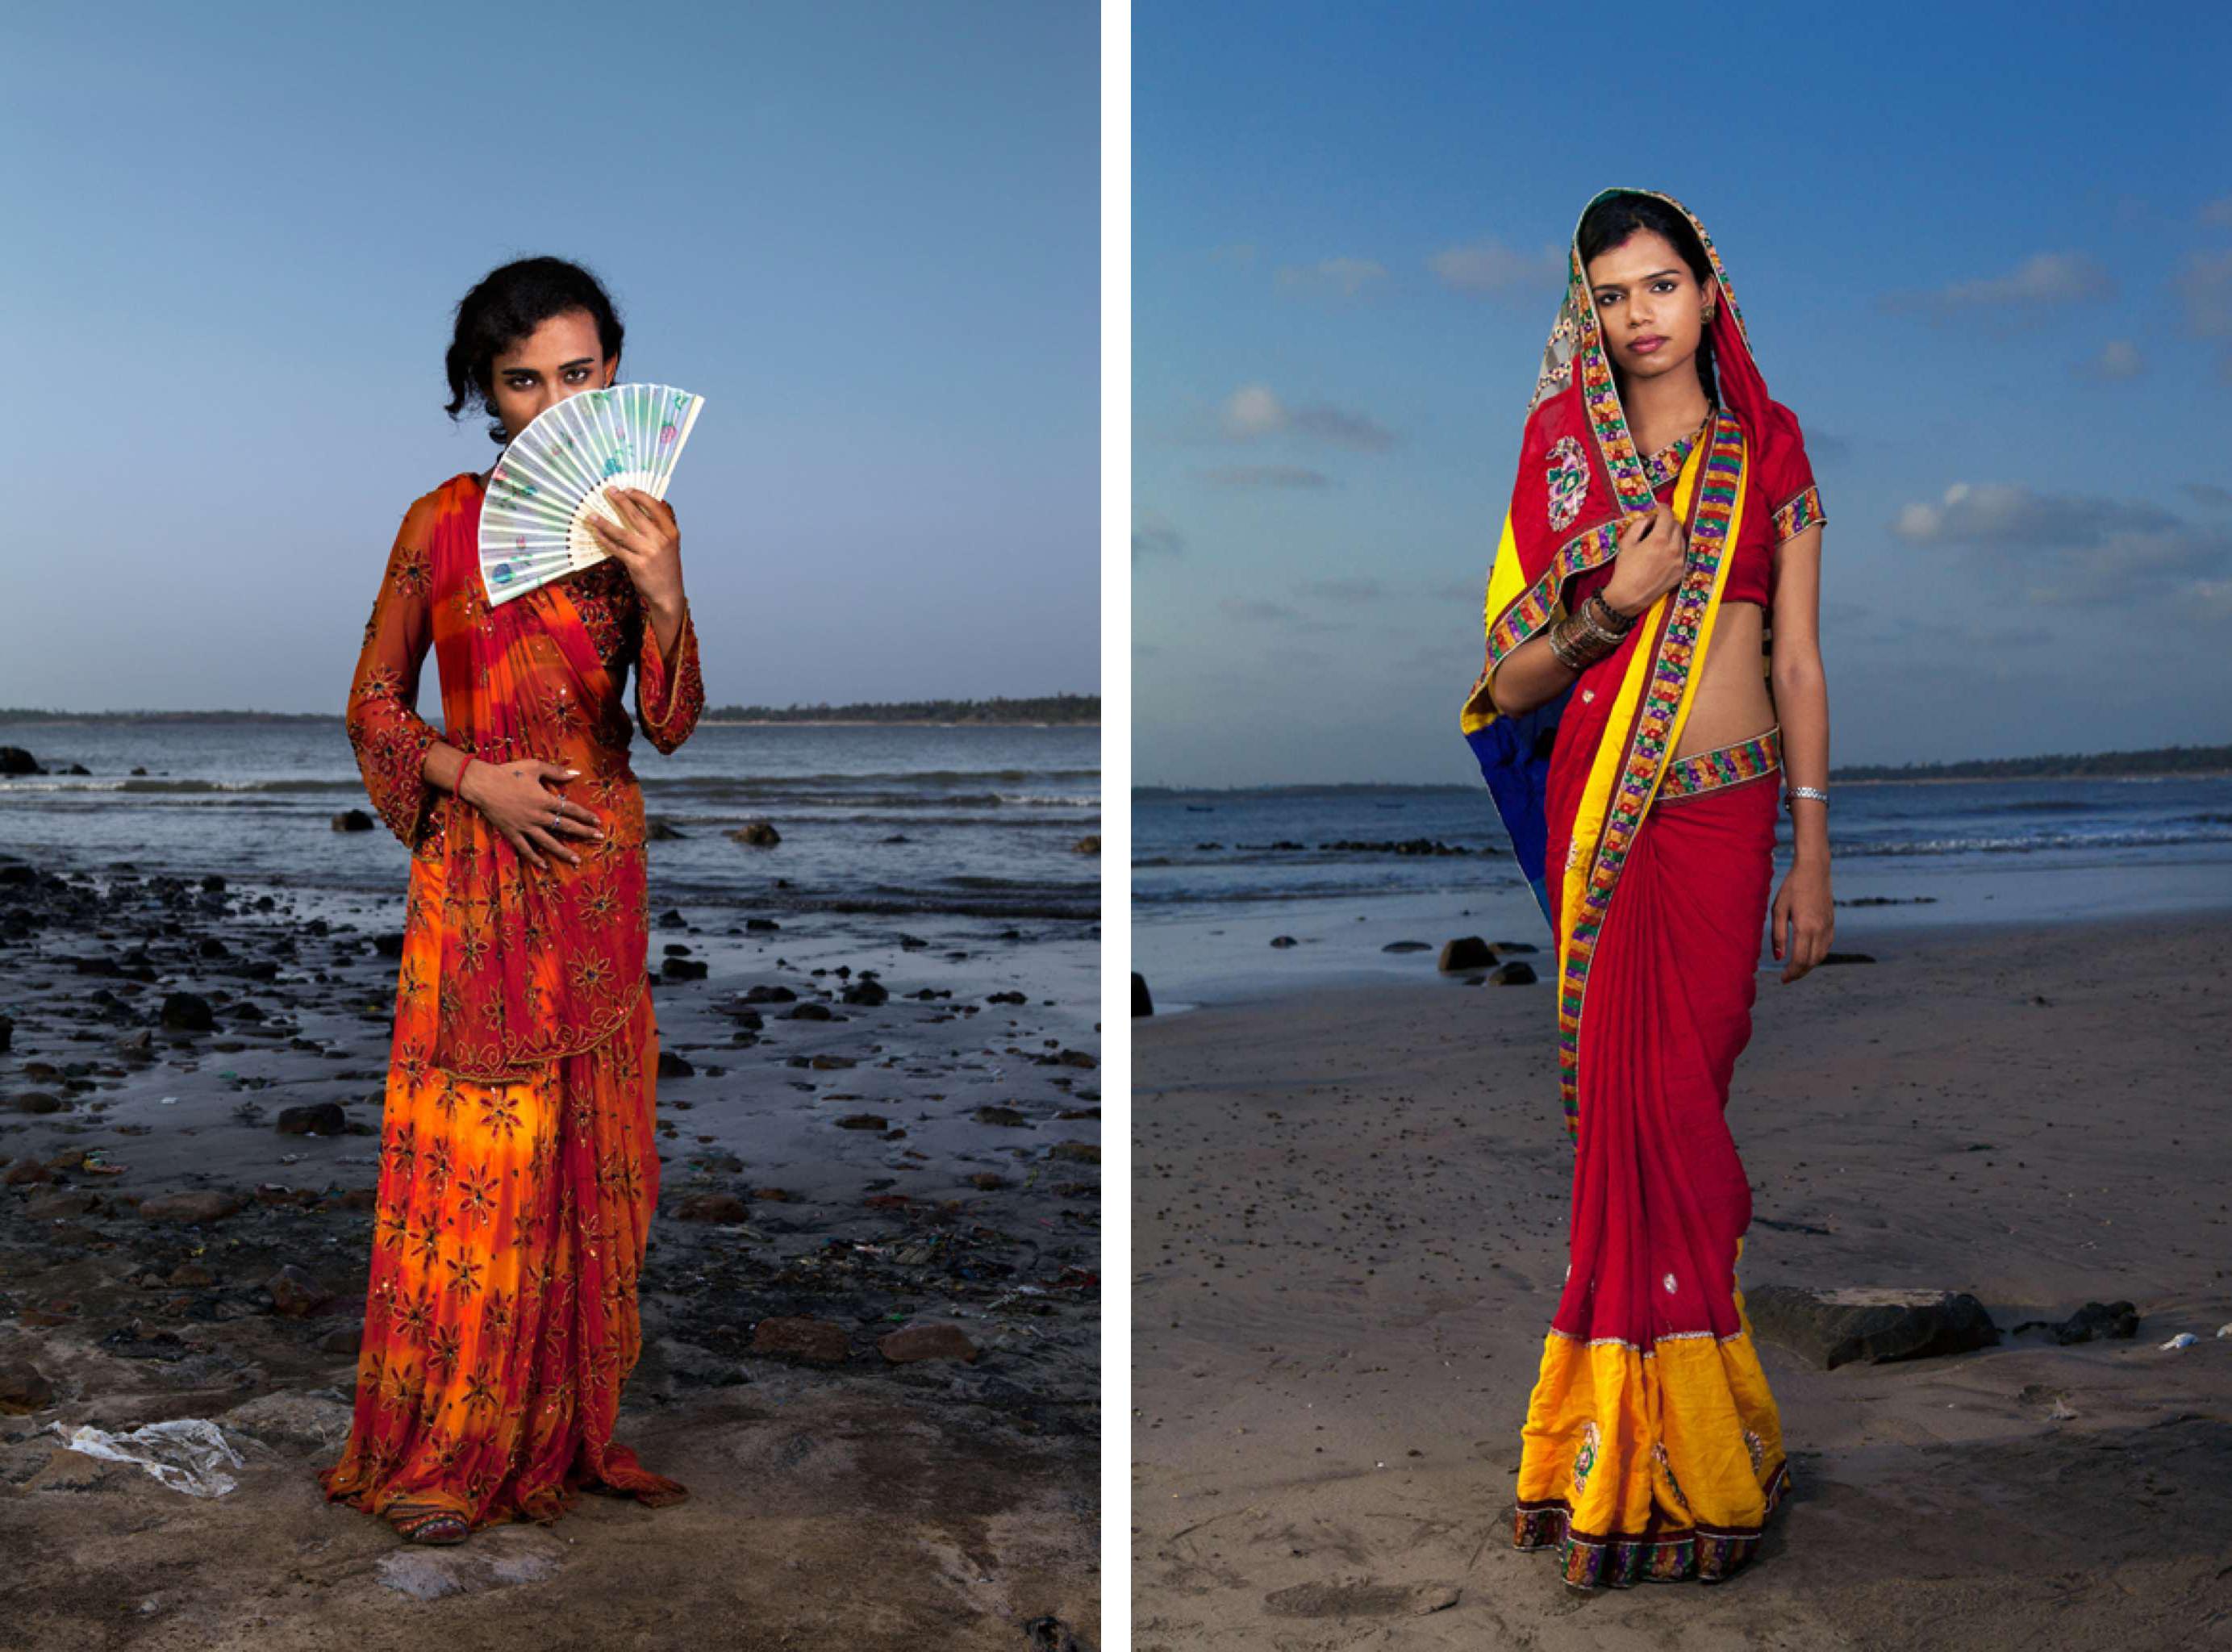 Vijay and Julie, Protrait. From The Series The Third Gender of India